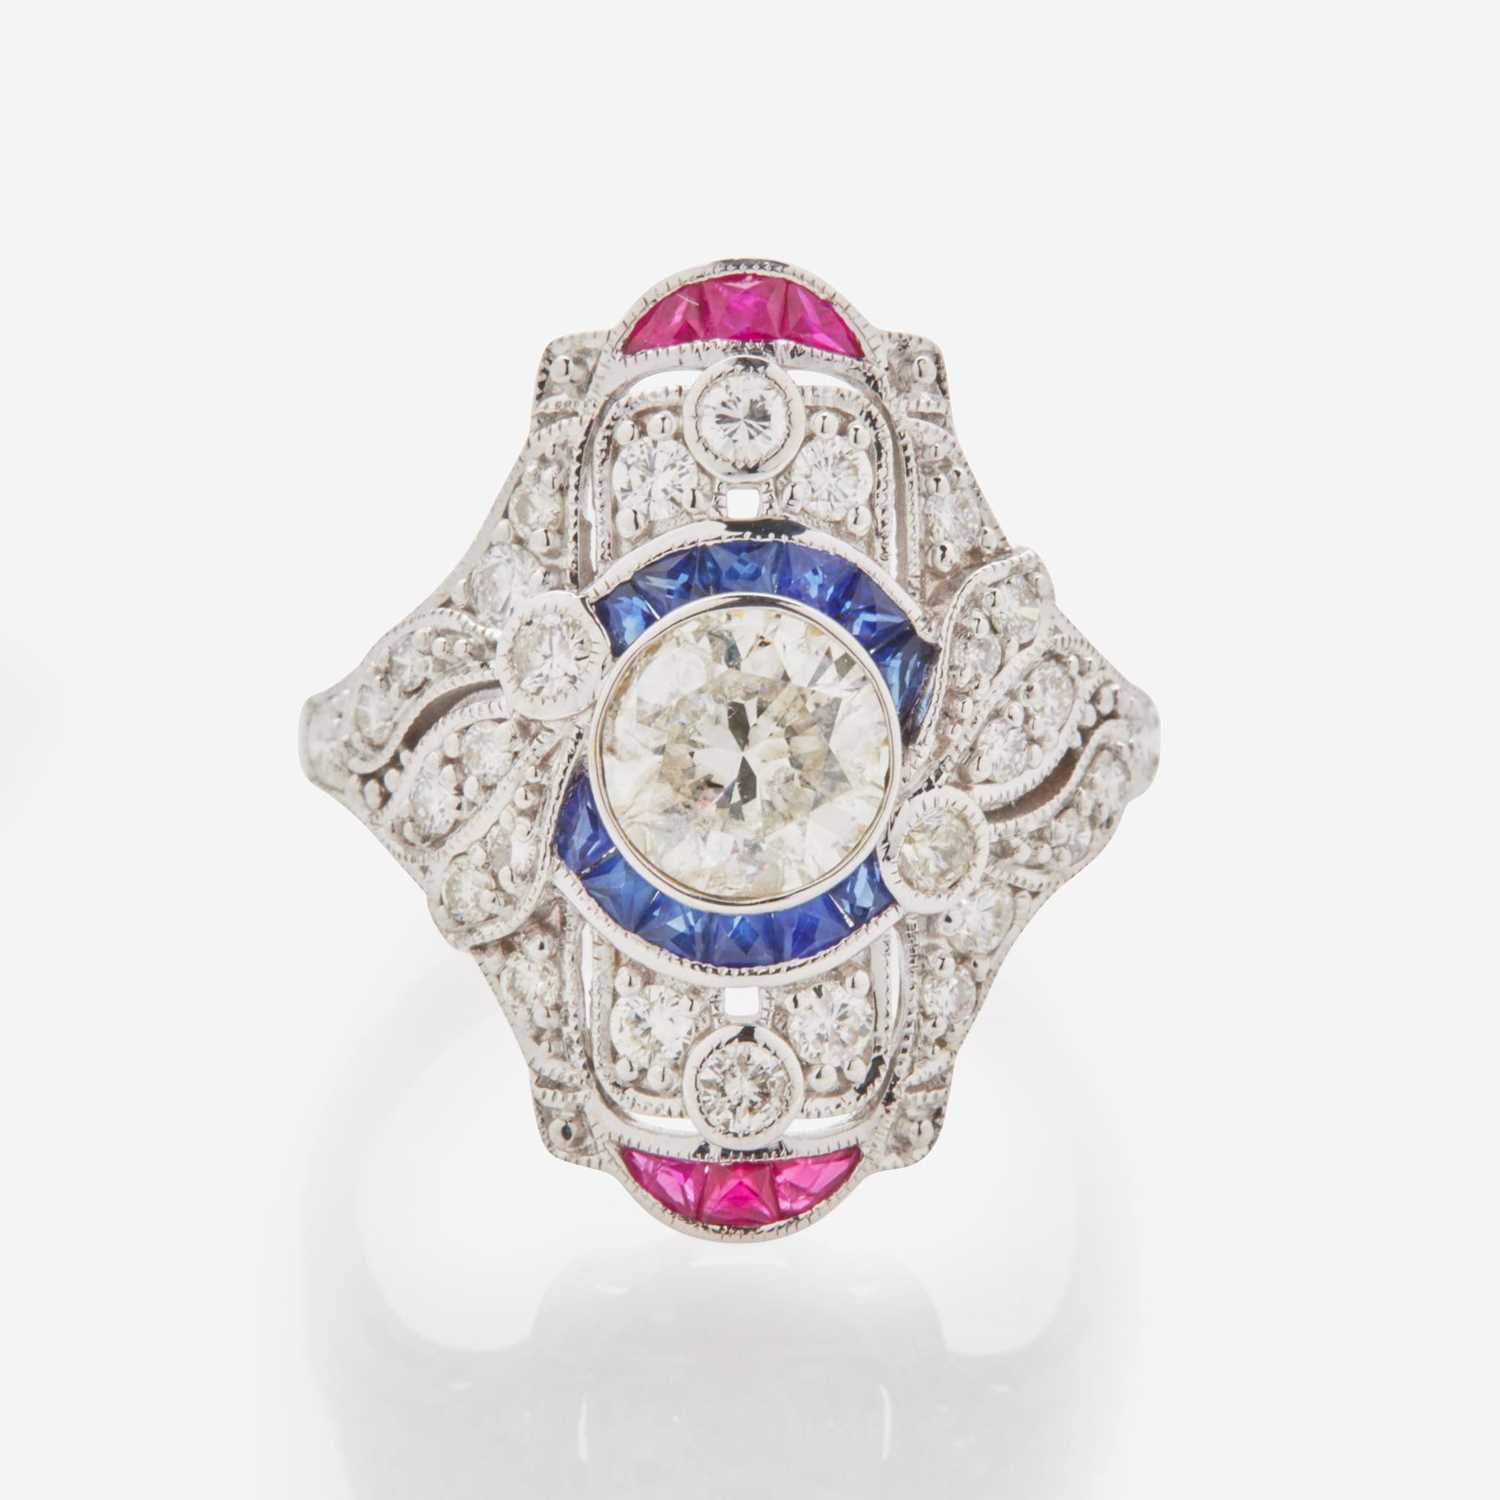 Lot 8 - A Diamond, Sapphire, Ruby and 18K White Gold Ring